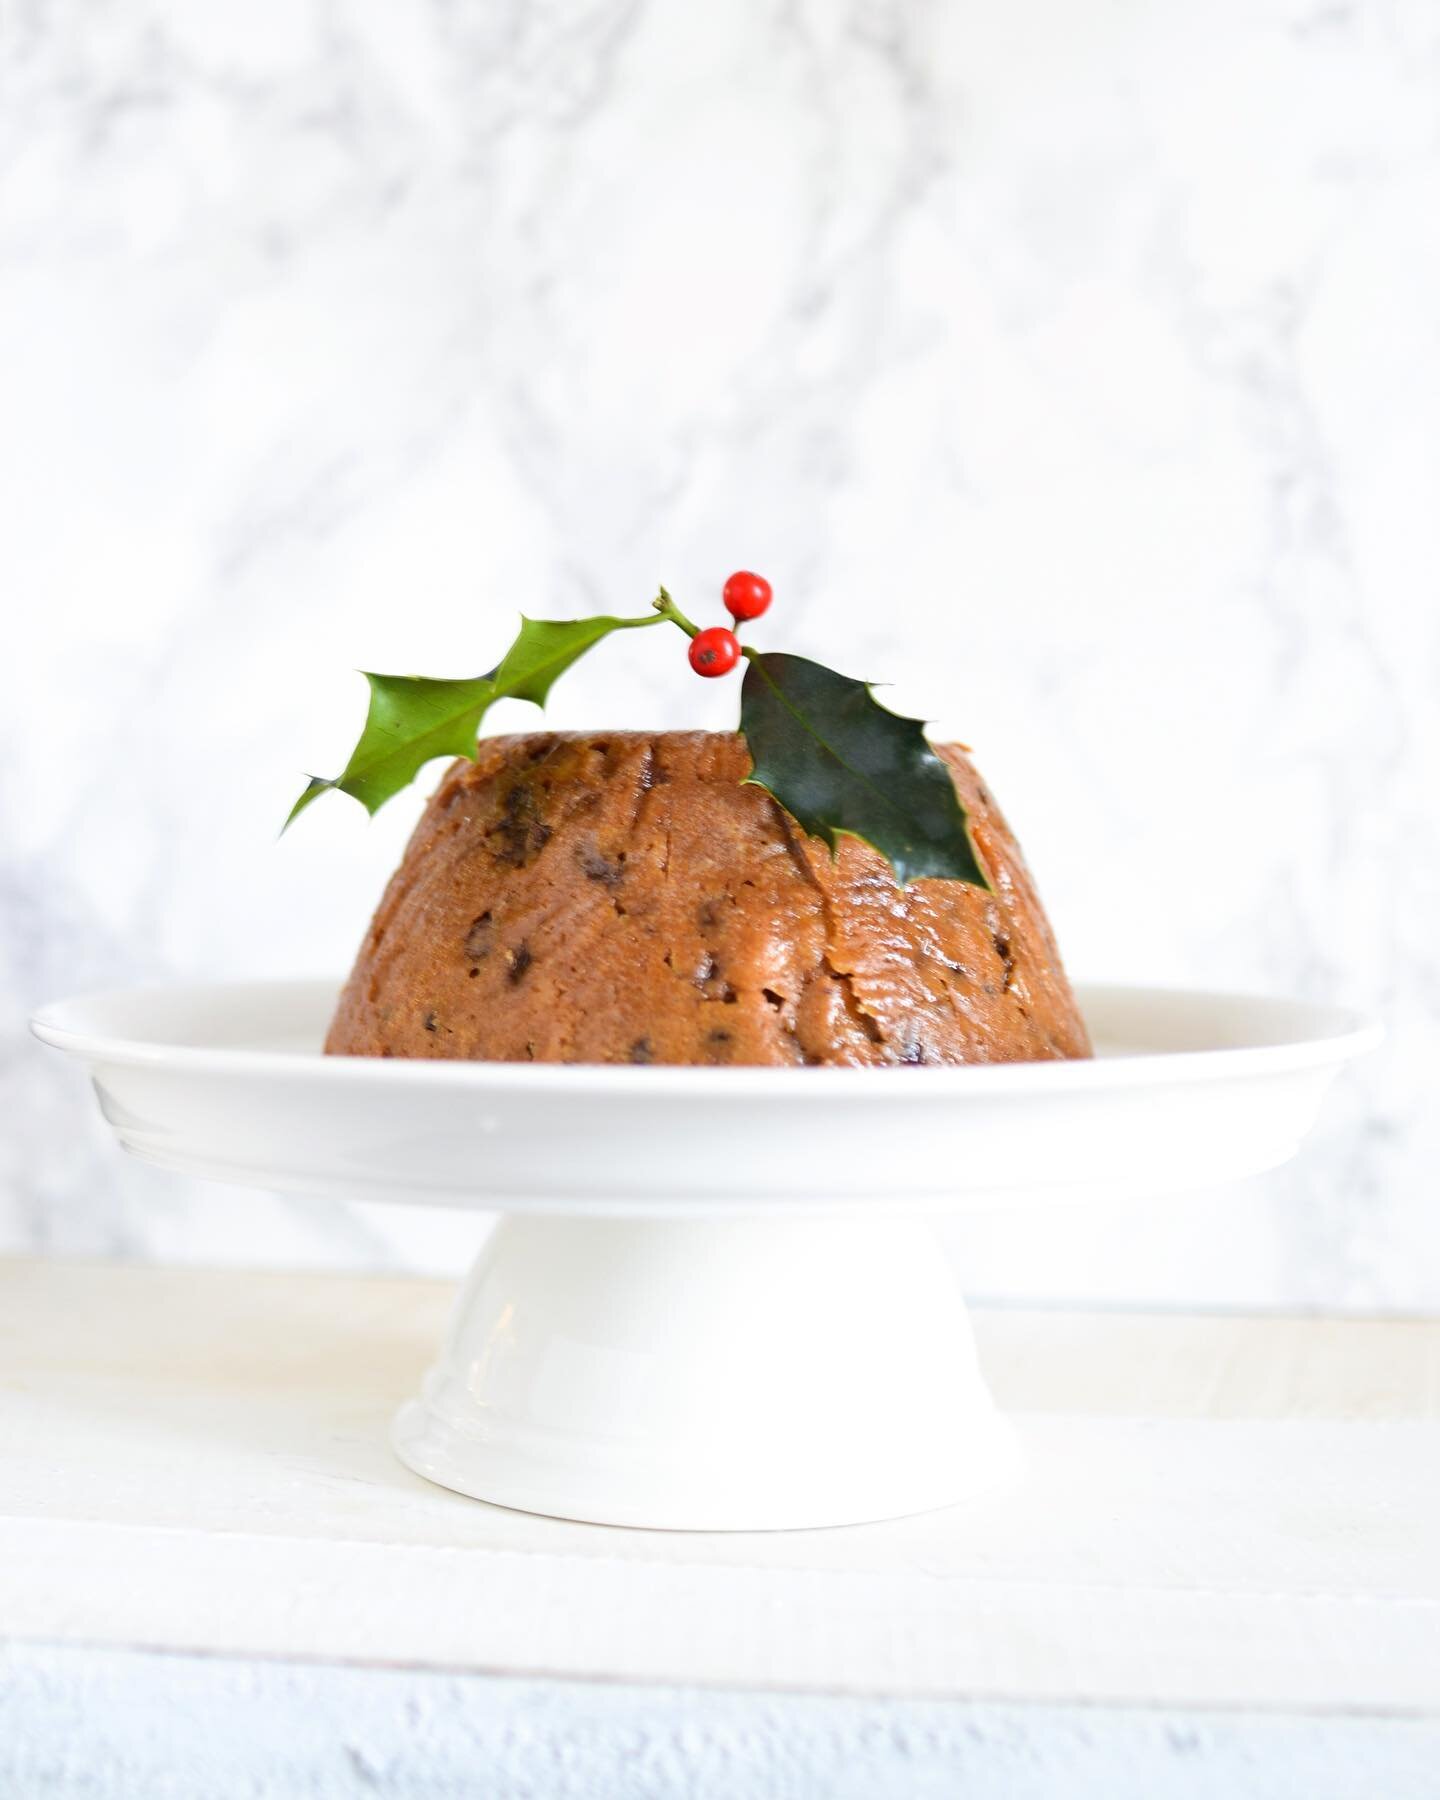 Is it really Christmas without a plum pudding? 🎄 Dried fruit, candied citrus peel, sugar, alcohol and a little bit of Christmas spirit makes the perfect end to the season. 

I hope you all had a Merry Christmas 🤗&hearts;️🤍

#christmas #christmaspu